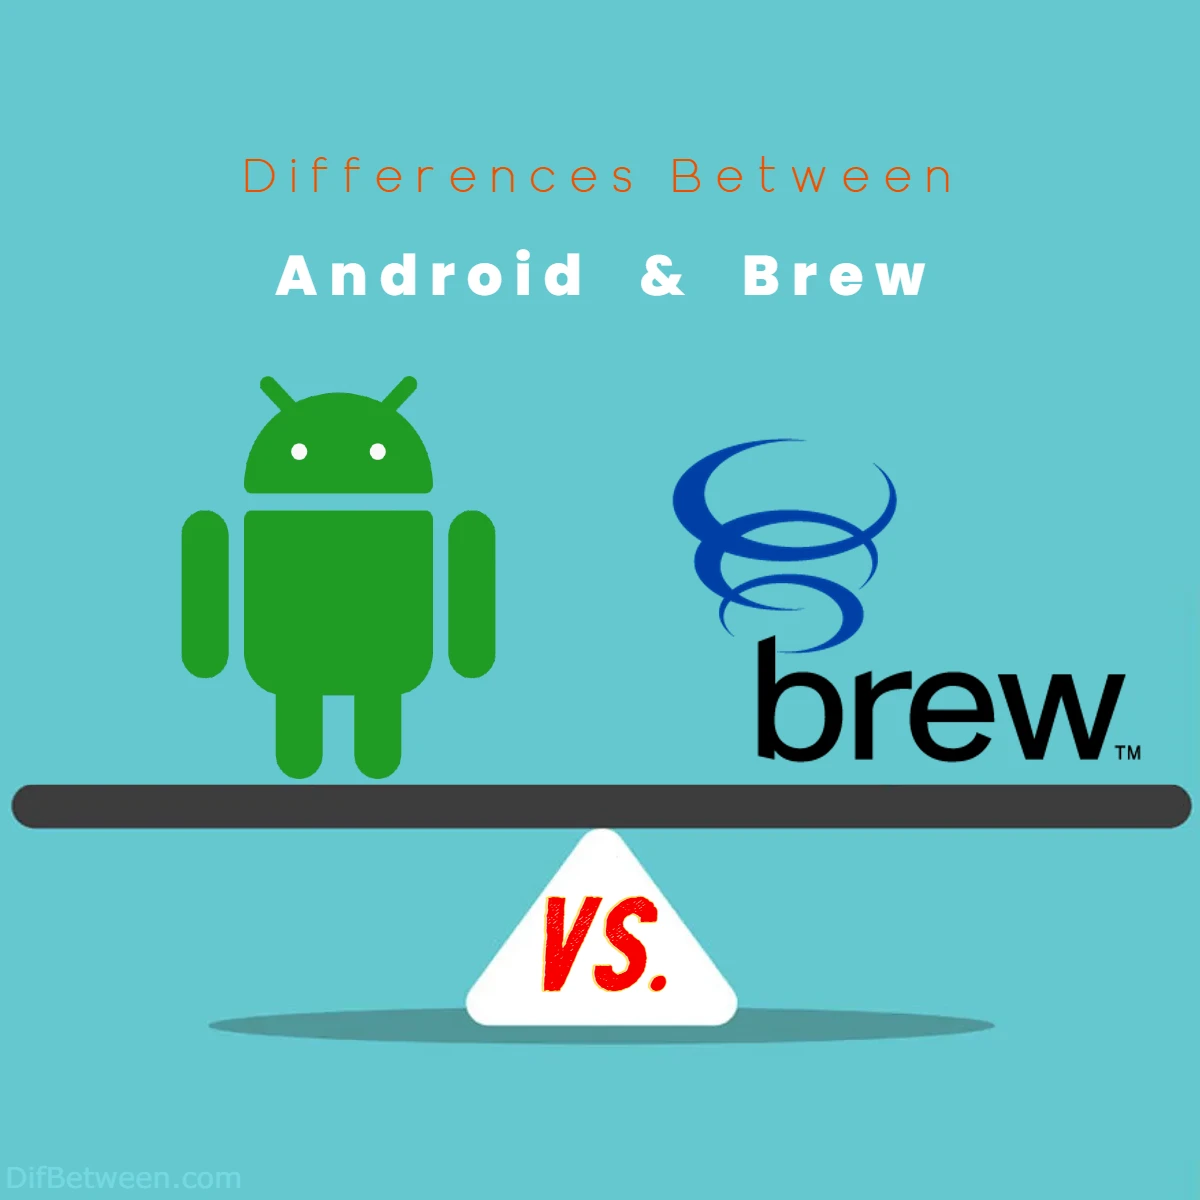 Differences Between Android vs Brew